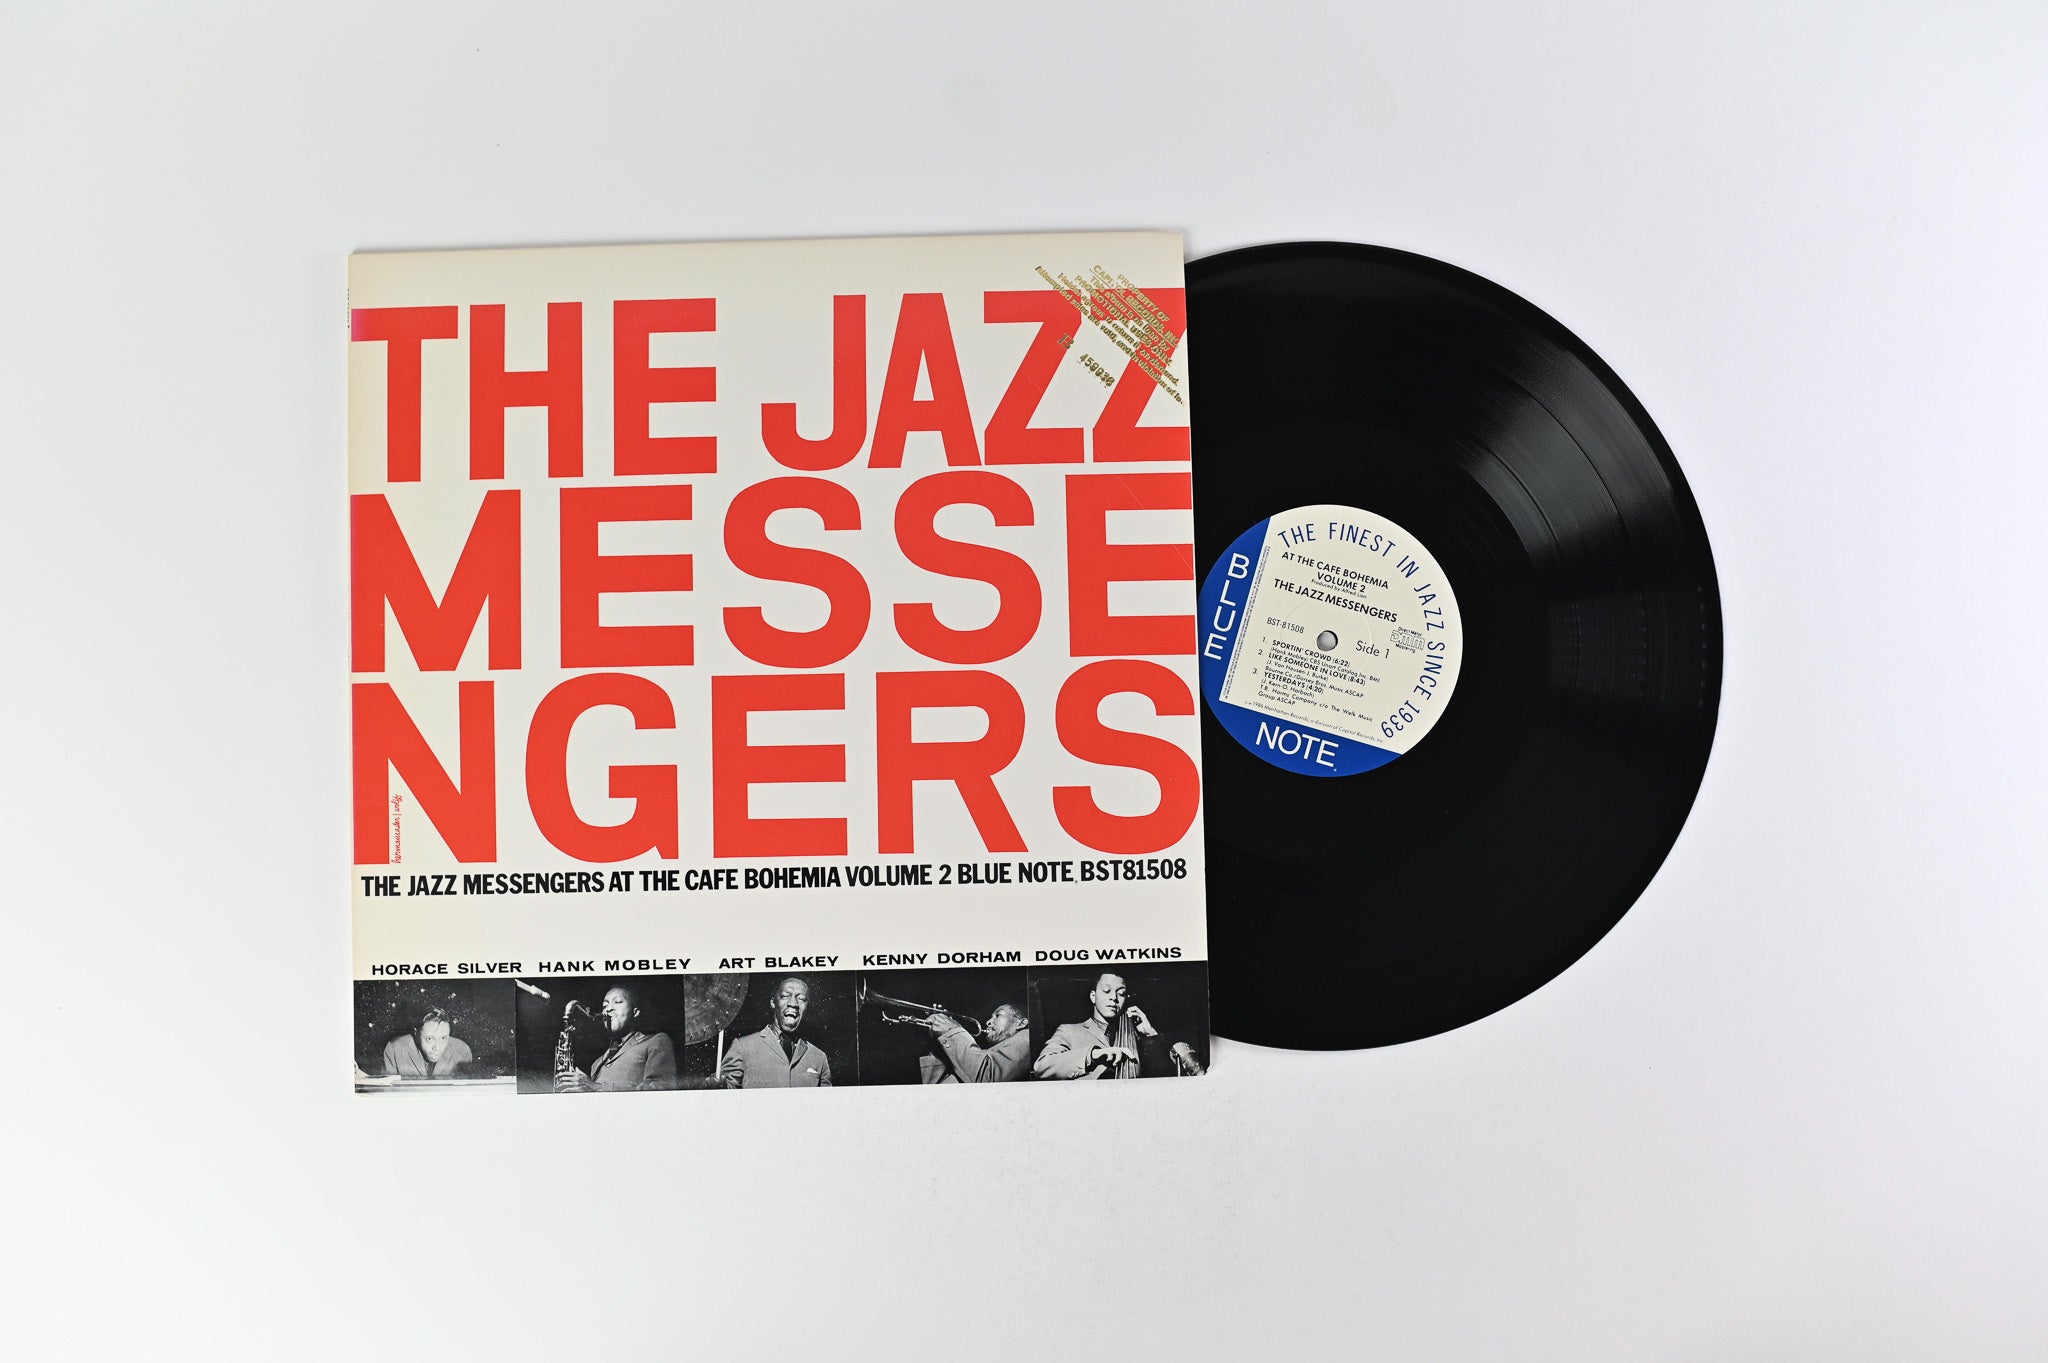 Art Blakey & The Jazz Messengers - At The Cafe Bohemia Volume 2 on Blue Note DMM Reissue